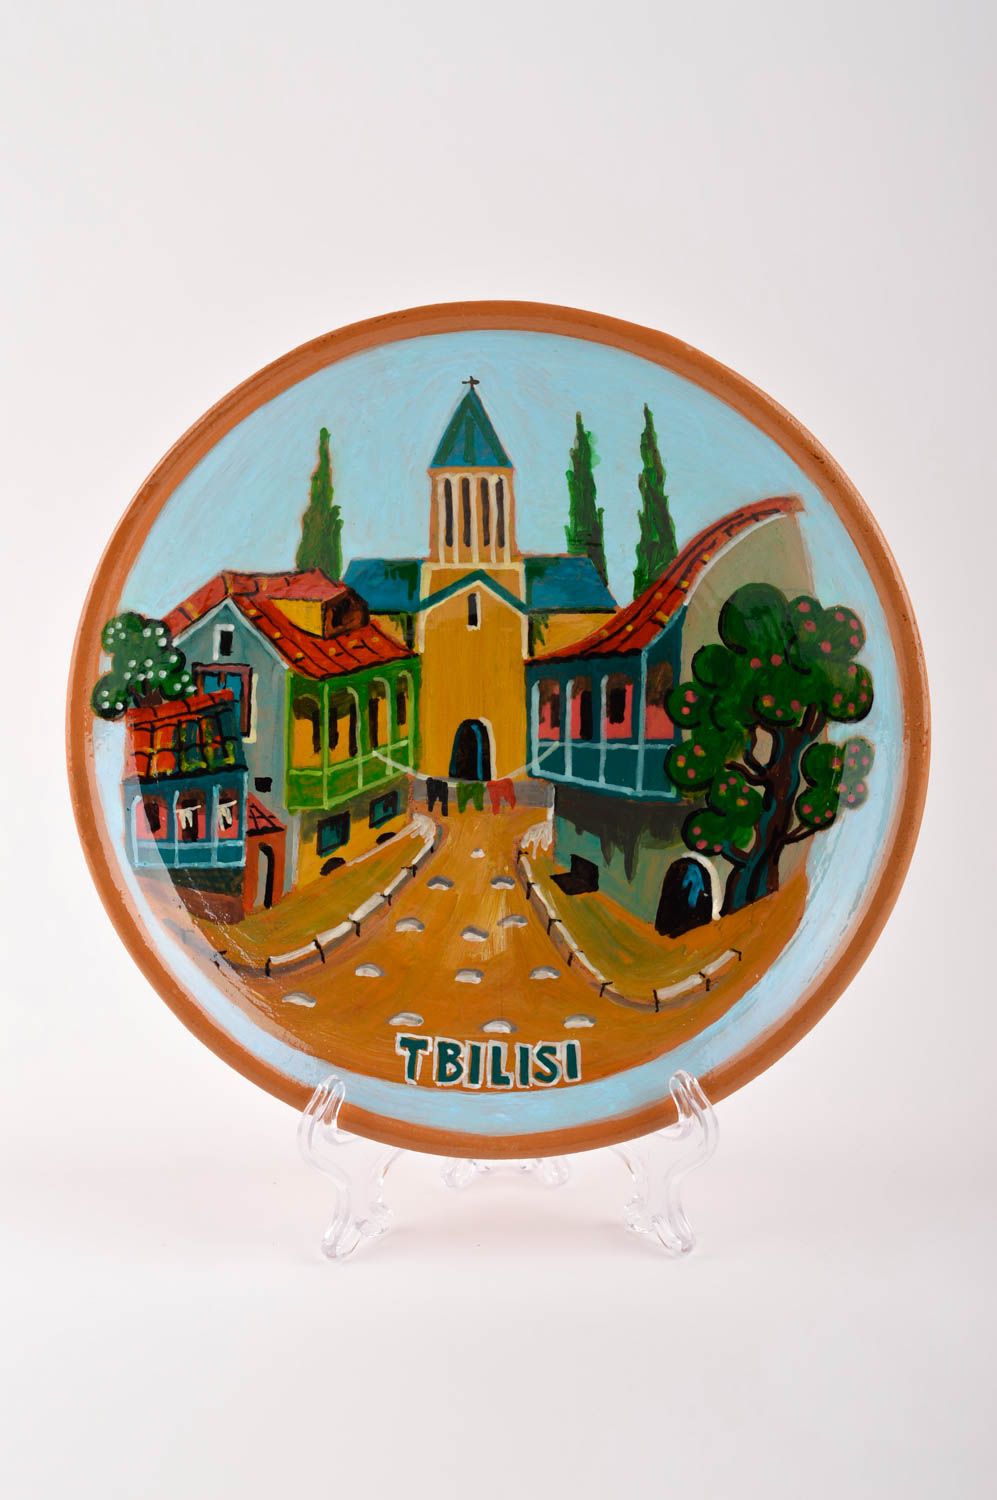 Handmade ceramic plate design pottery works wall hanging decorative use only photo 2